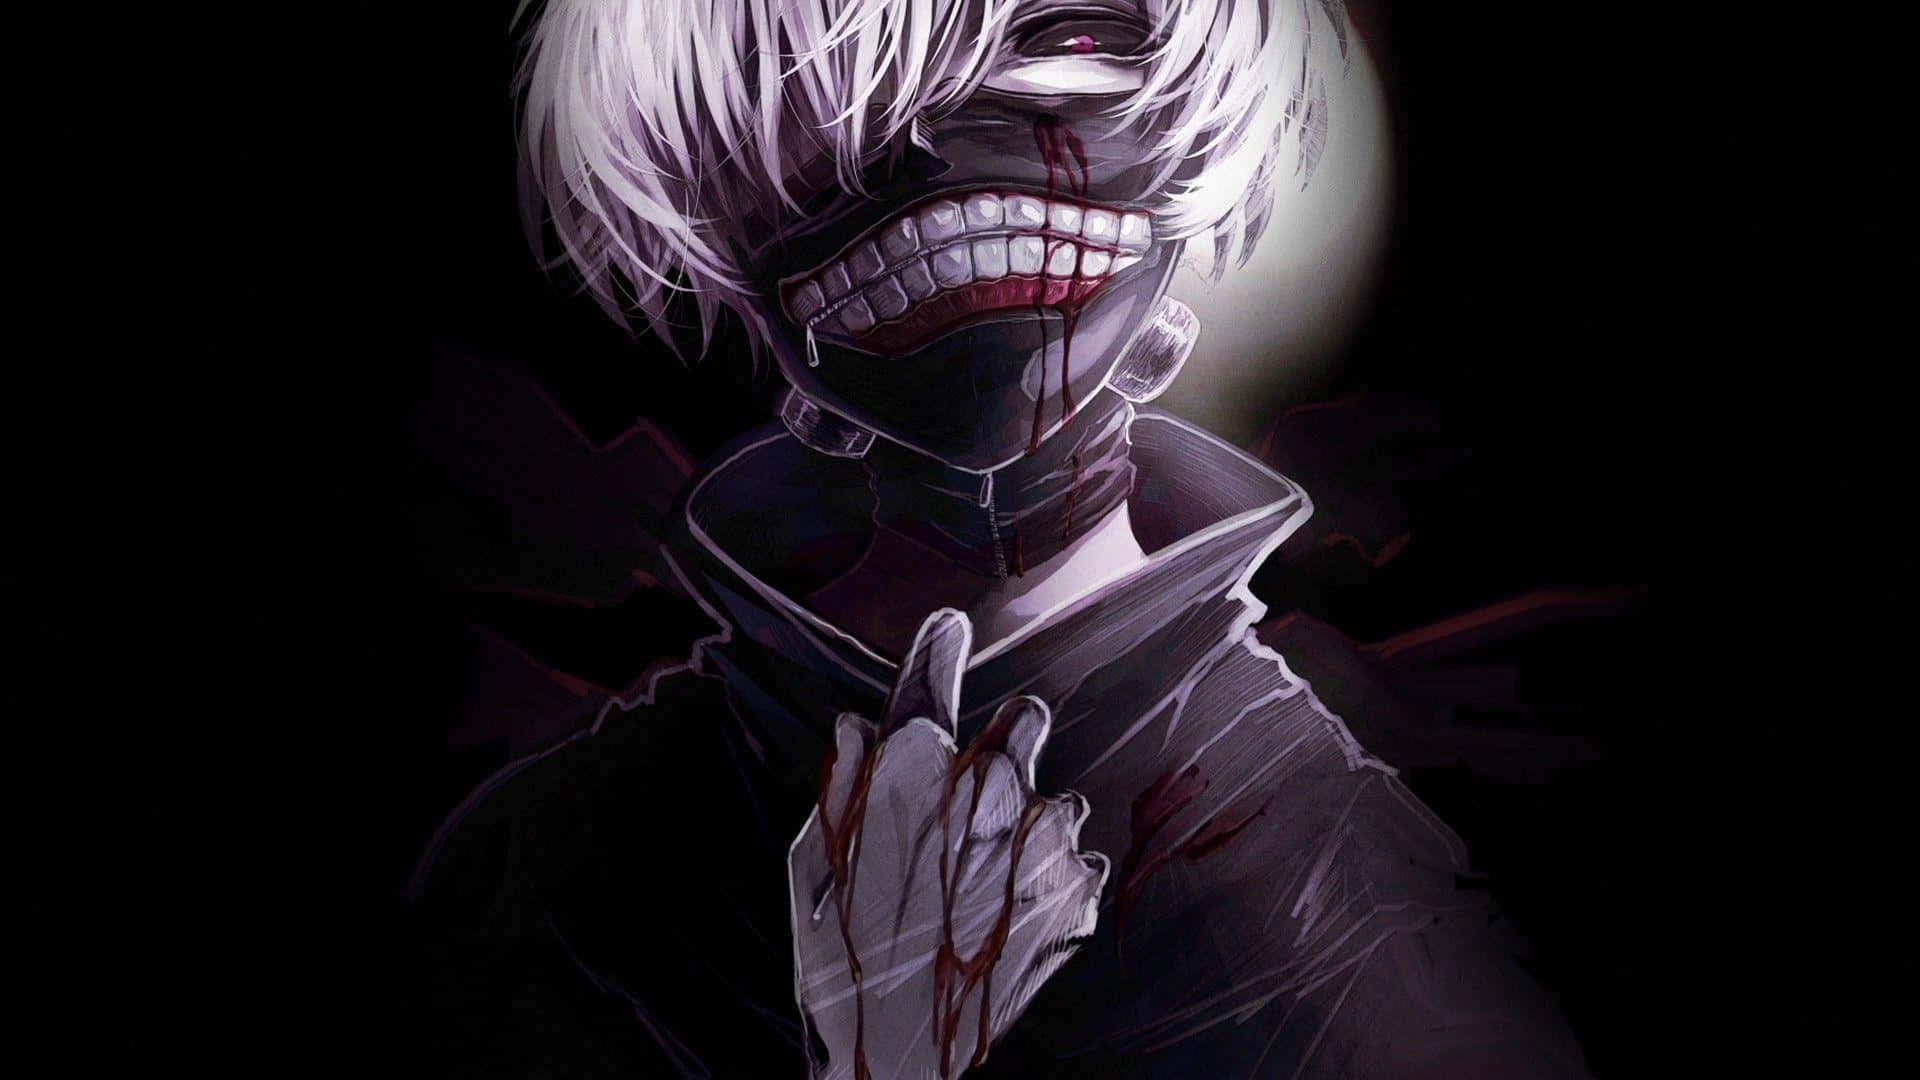 Follow Kaneki on his journey to becoming a ghoul